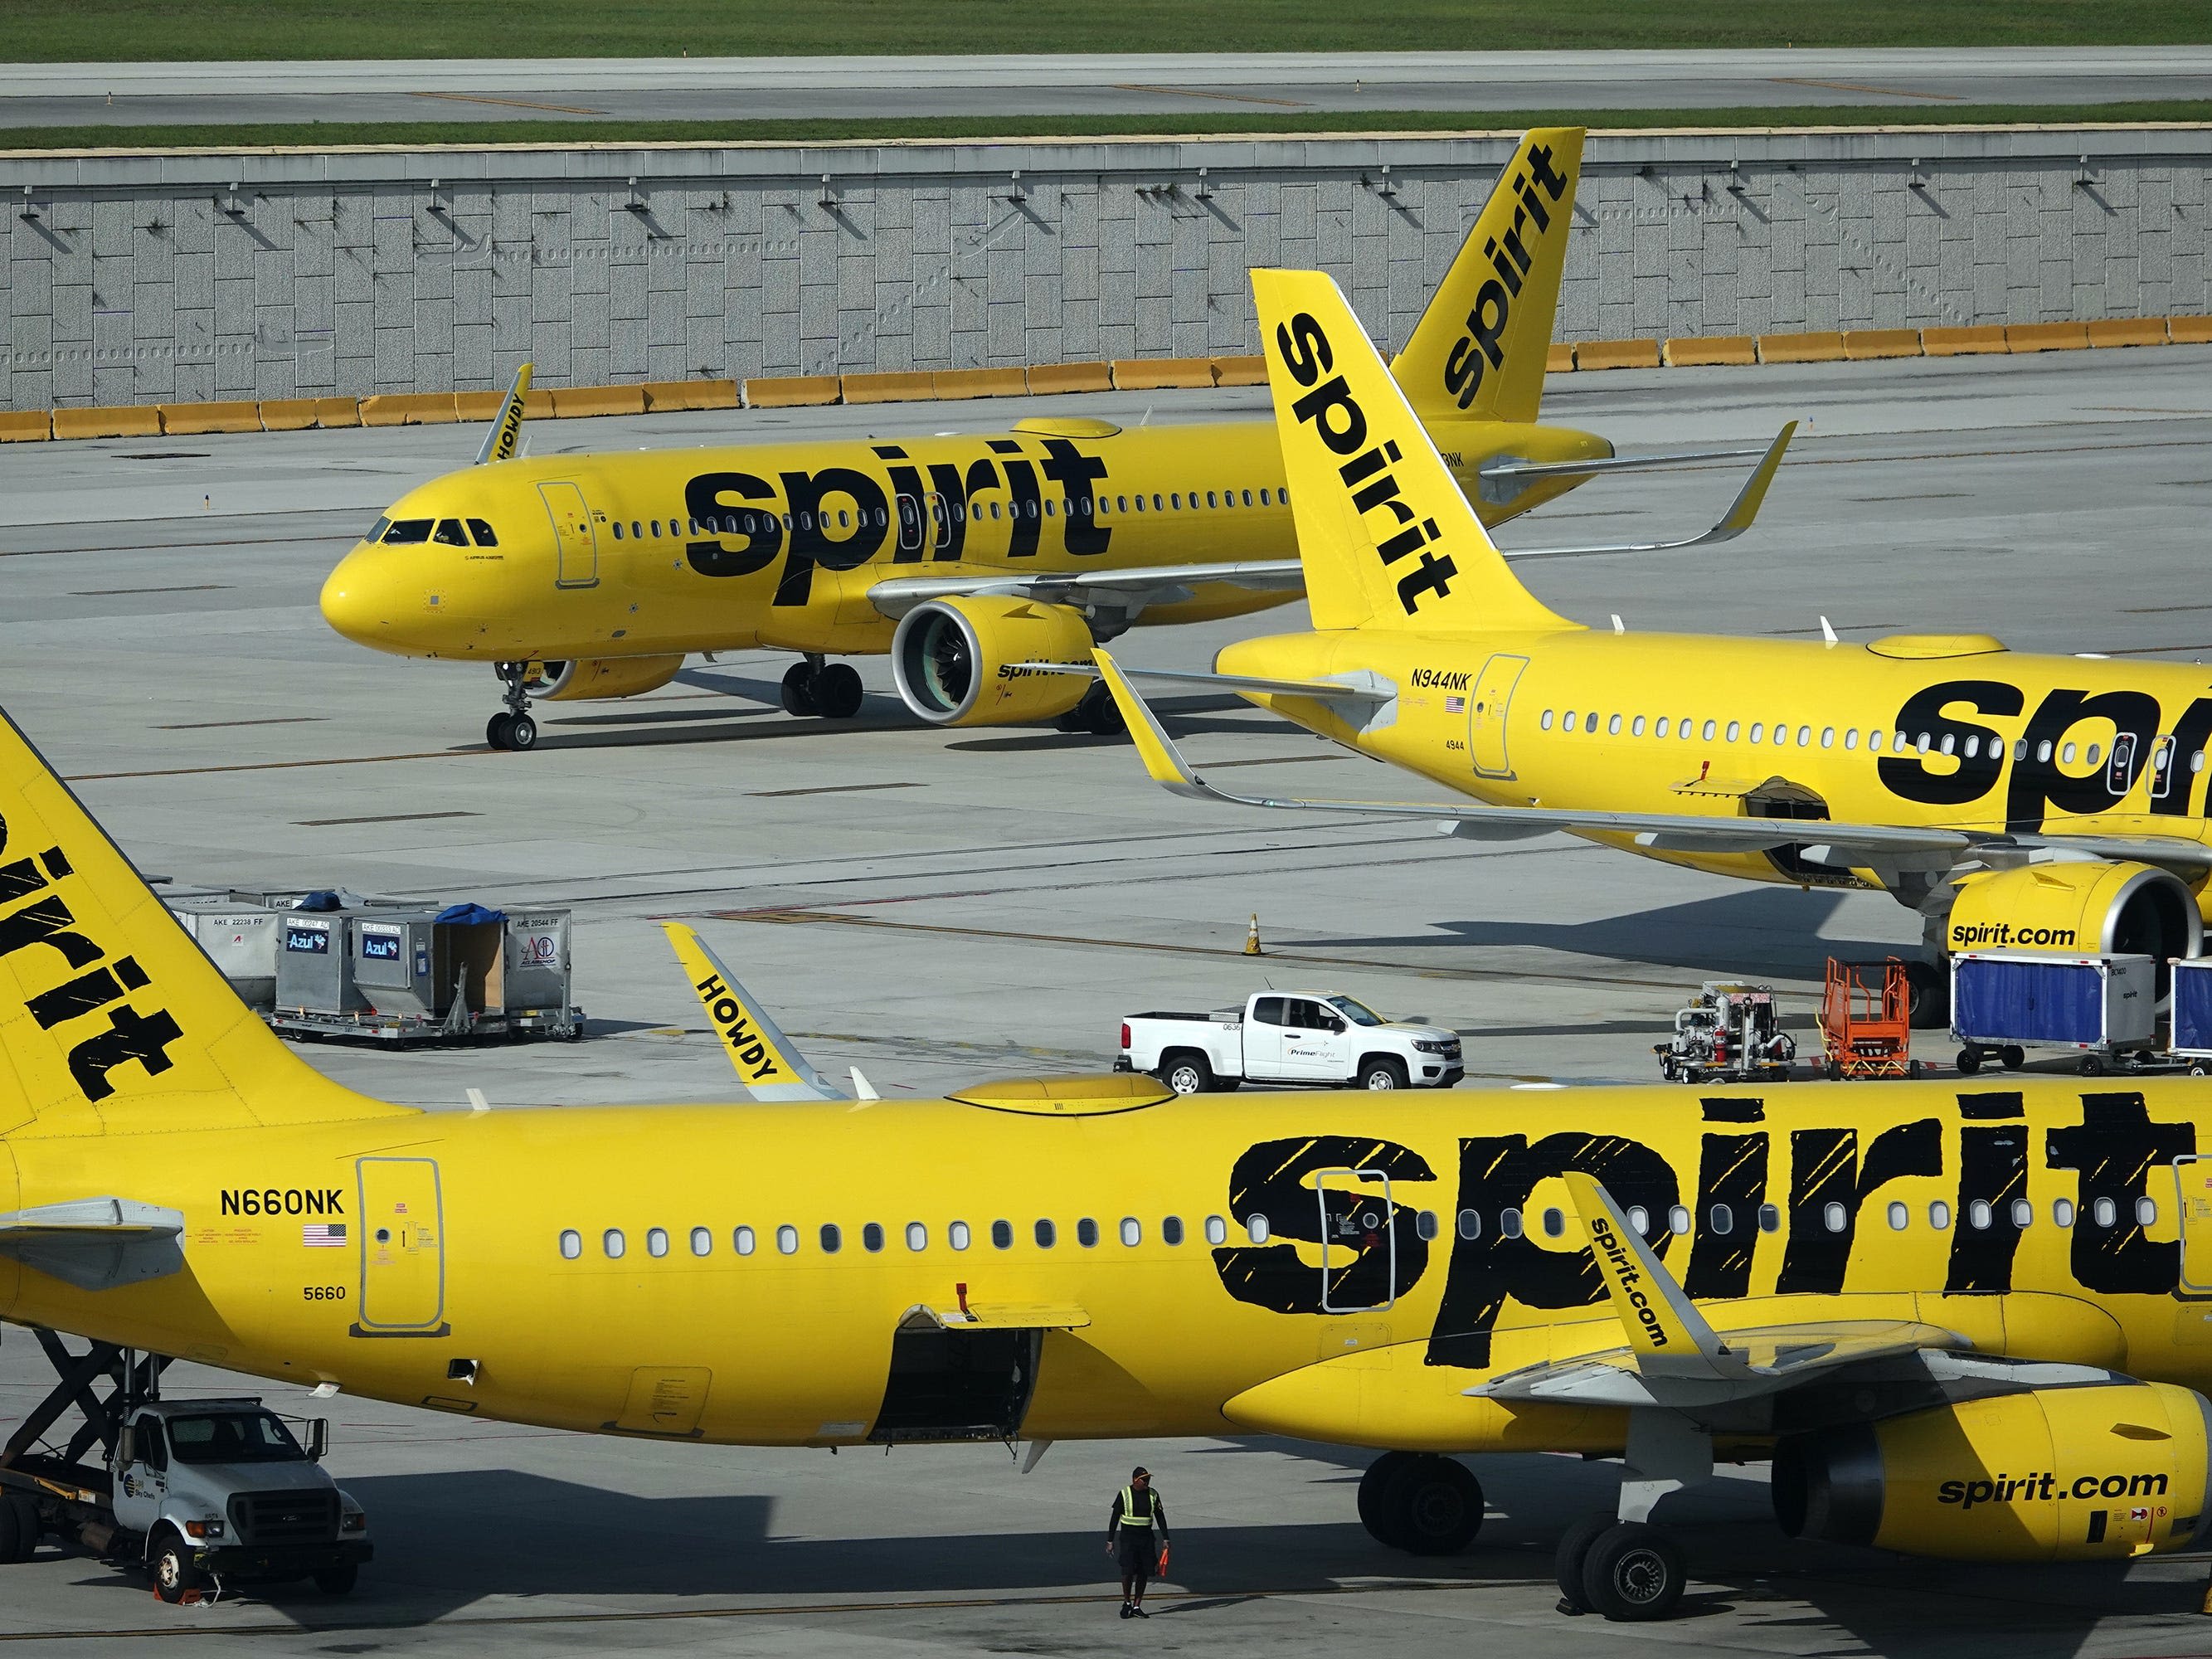 Spirit passengers are getting fed up with the ultra-low-cost airline's extra fees